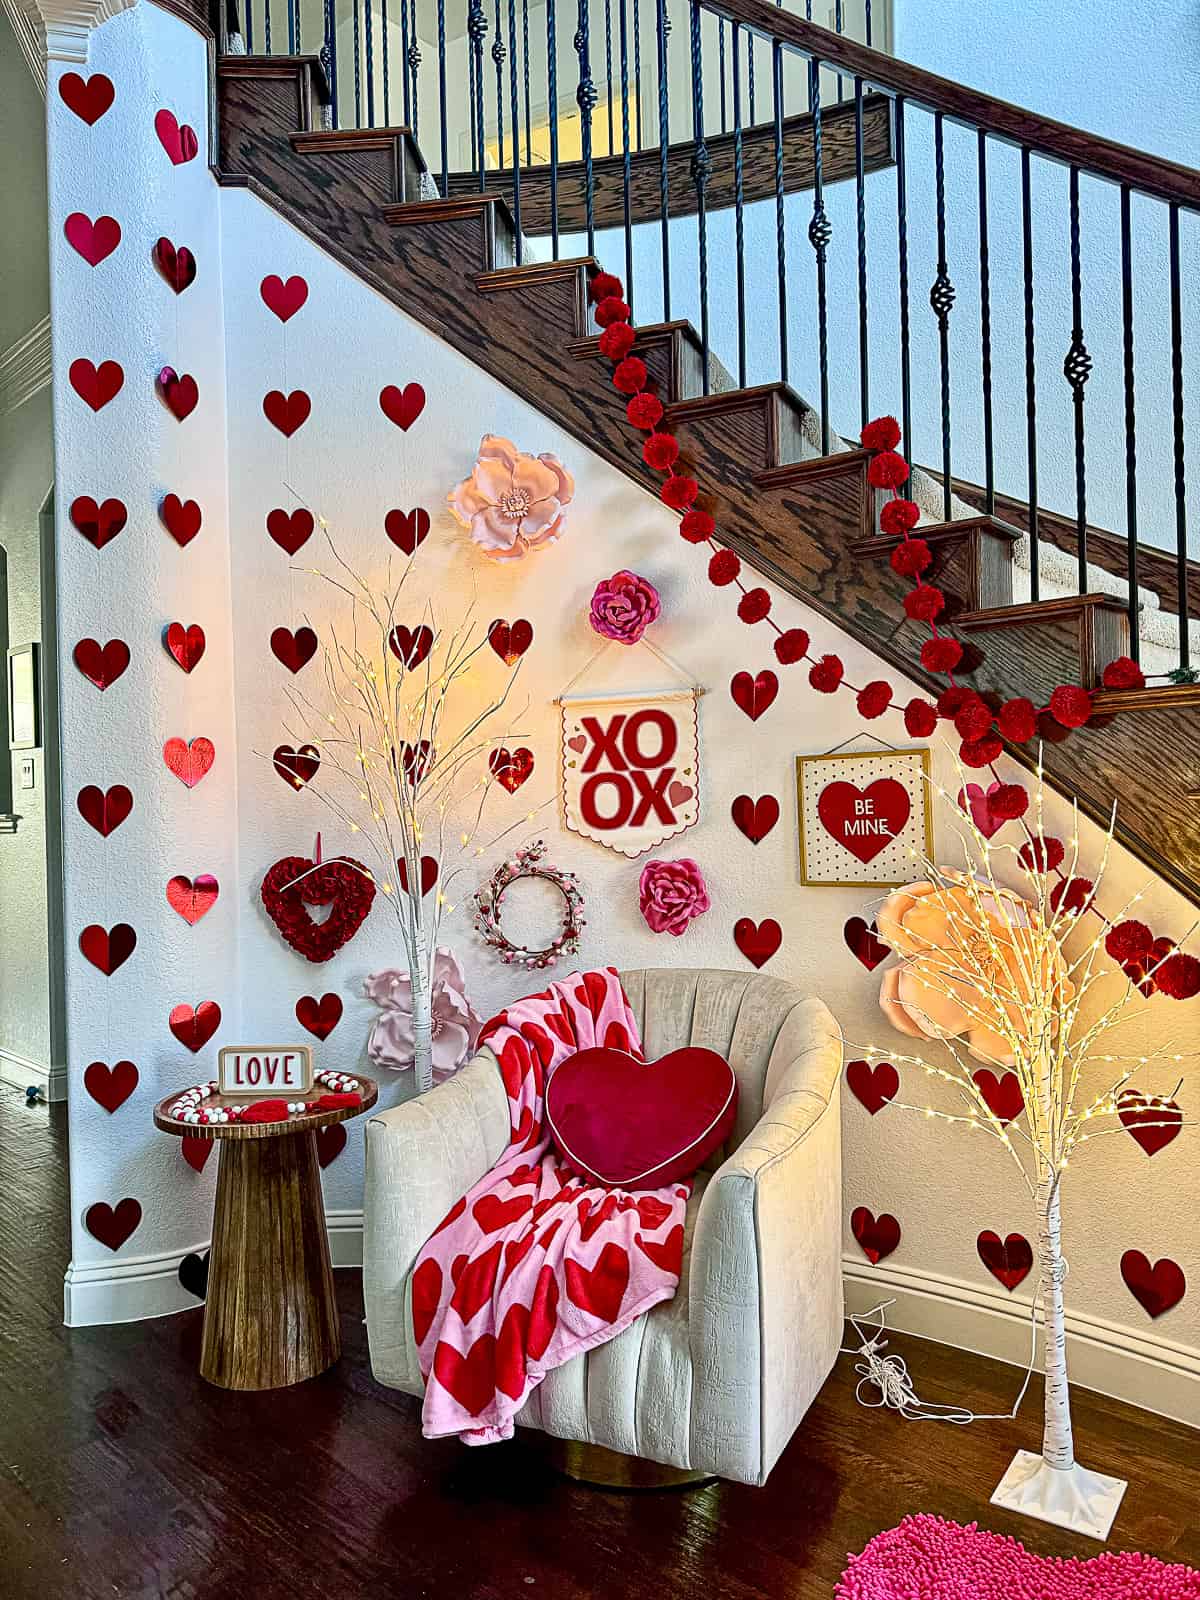 Valentine's Day Decor with Chair in Stairway Entryway